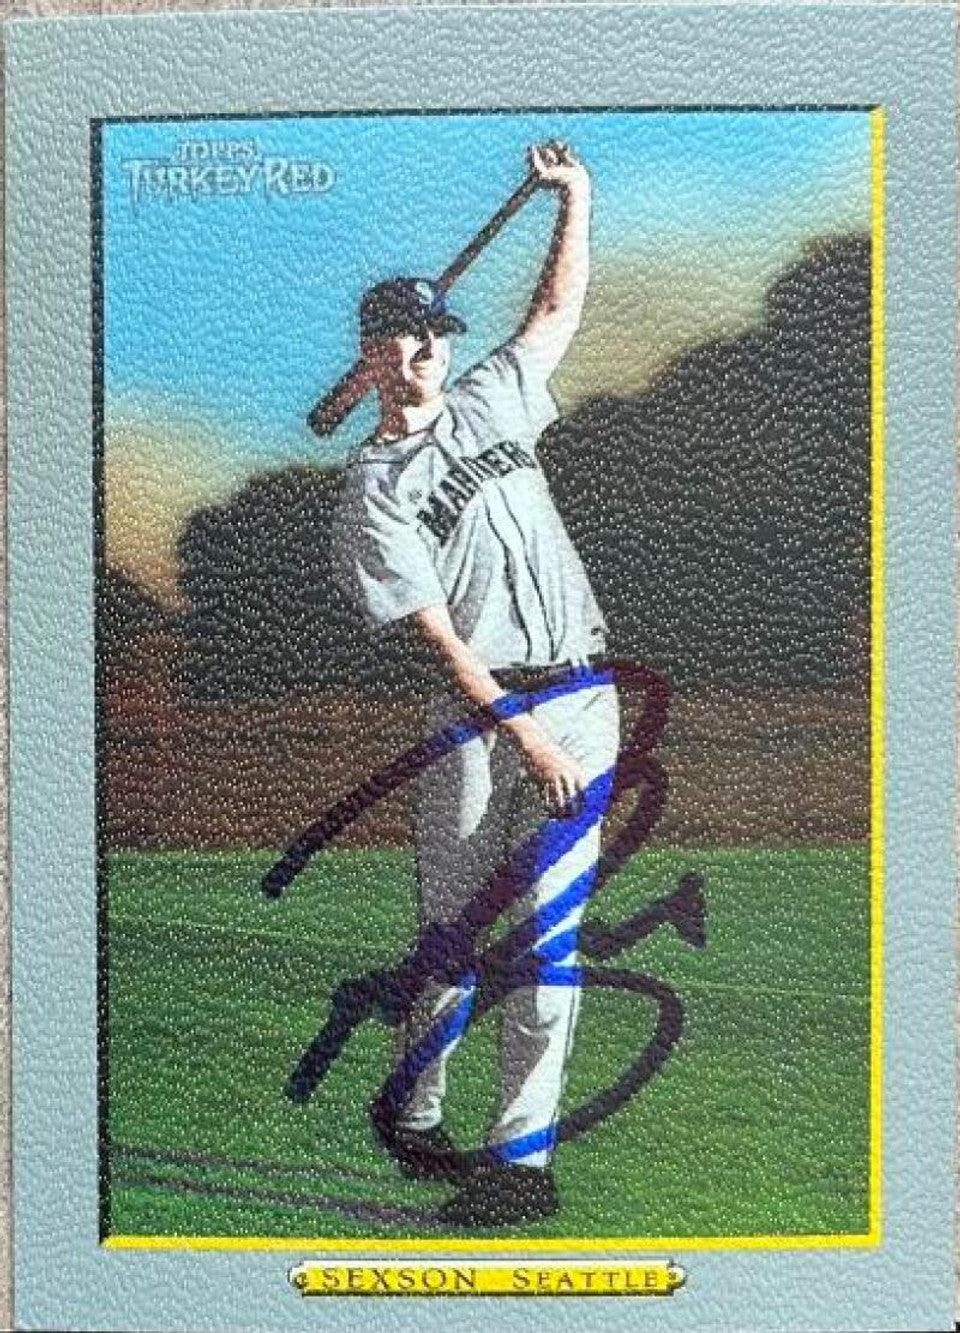 Richie Sexson Signed 2006 Topps Turkey Red Baseball Card - Seattle Mariners - PastPros